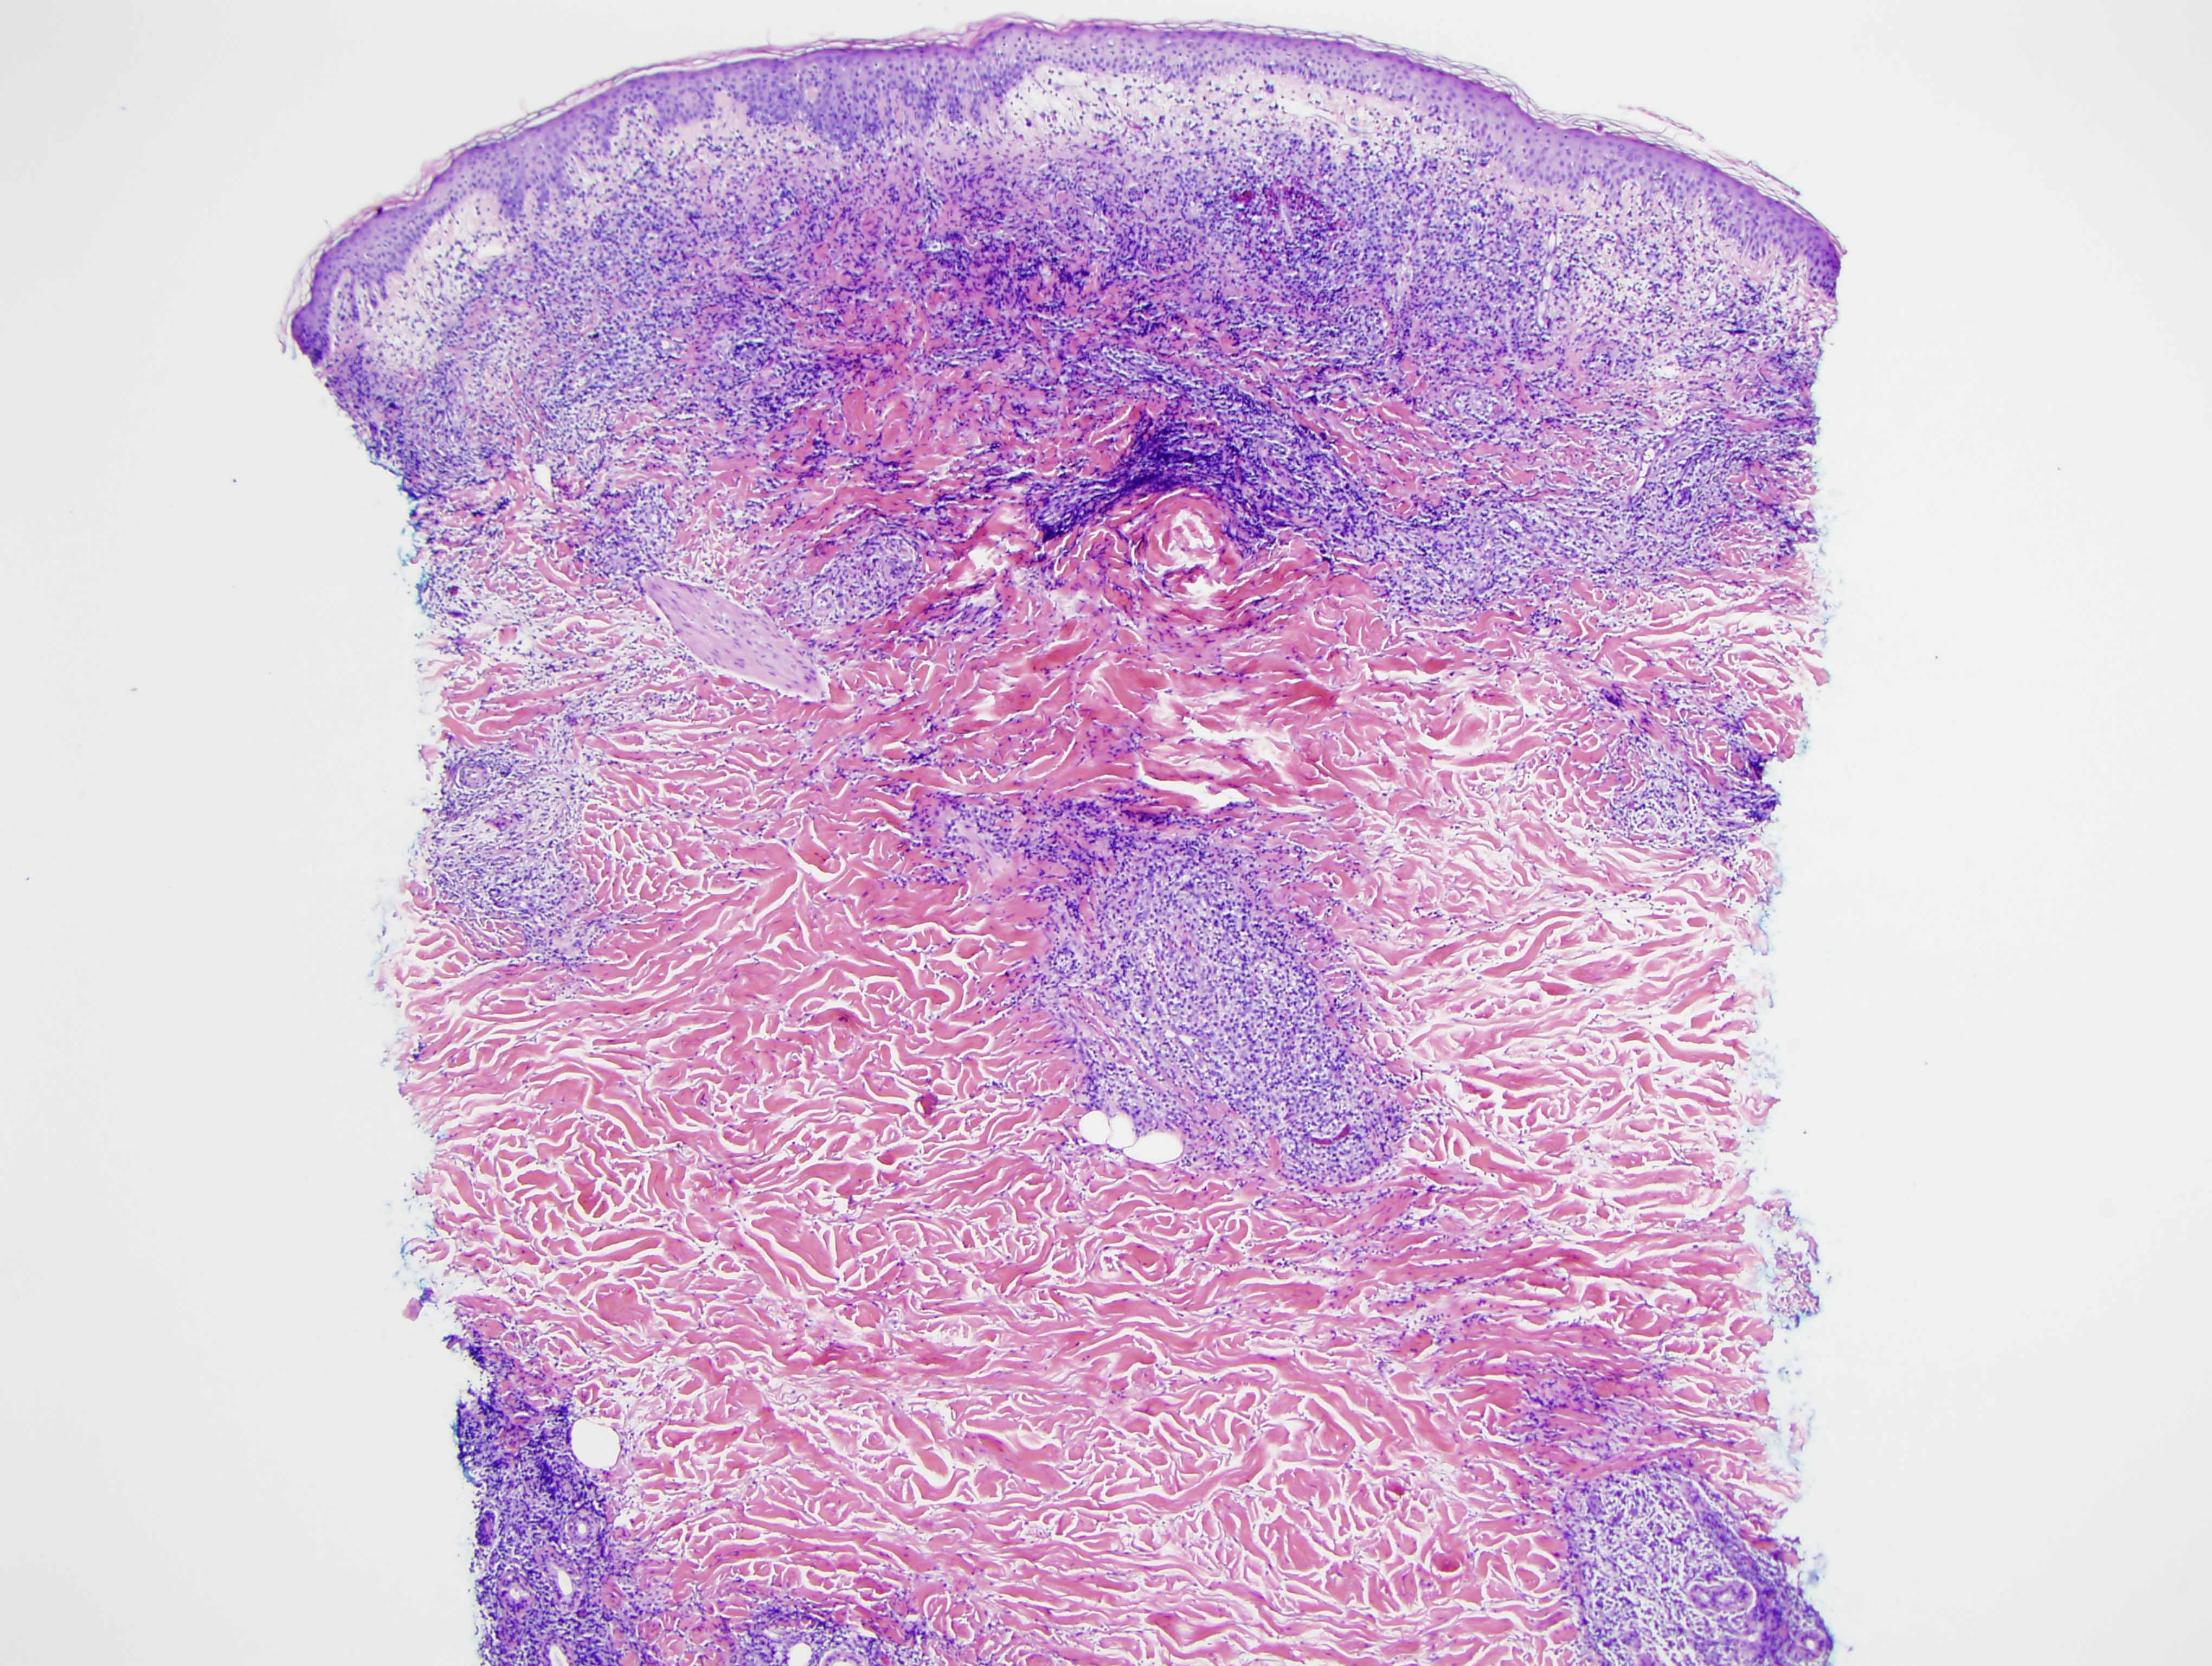 Slide 1: At low power, one can appreciate the atypical, extensive lymphocytic infiltrate.